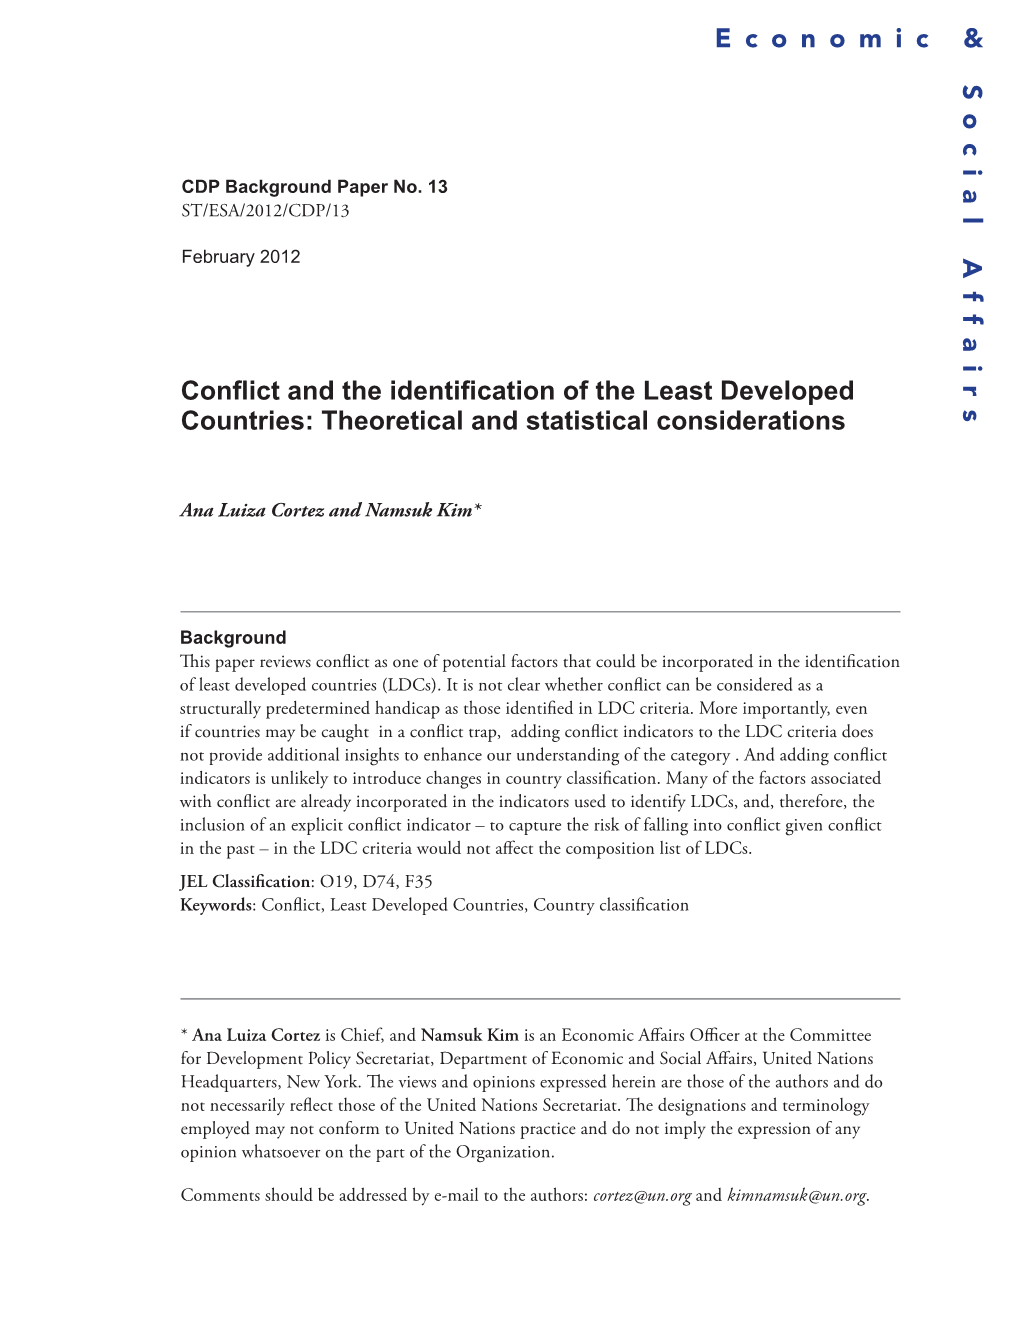 Conflict and the Identification of the Least Developed Countries: Theoretical and Statistical Considerations